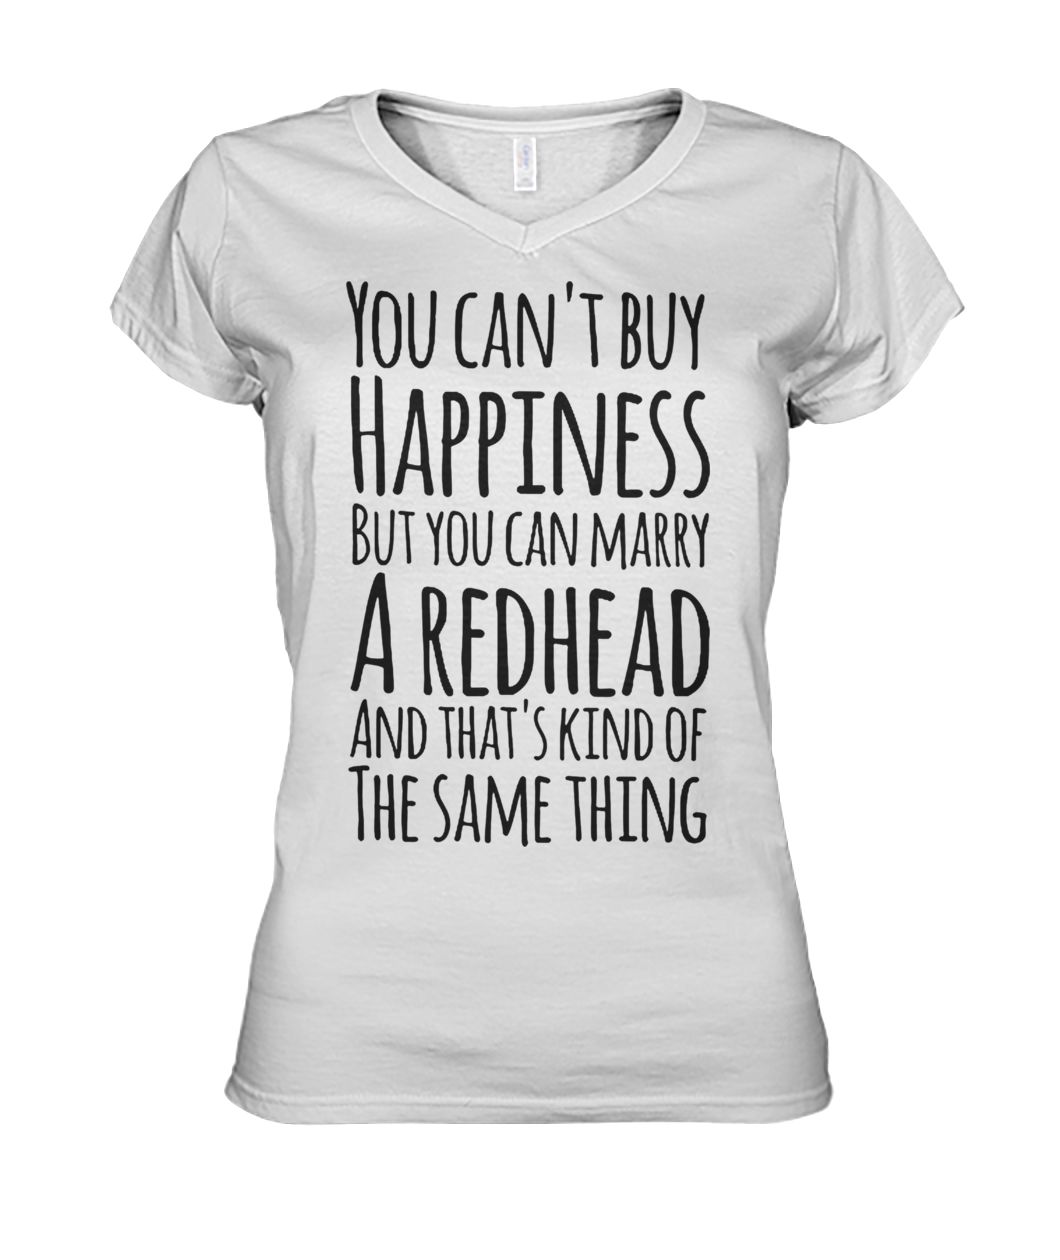 You can’t buy happiness but you can marry a redhead and that’s kind of the same thing women's v-neck